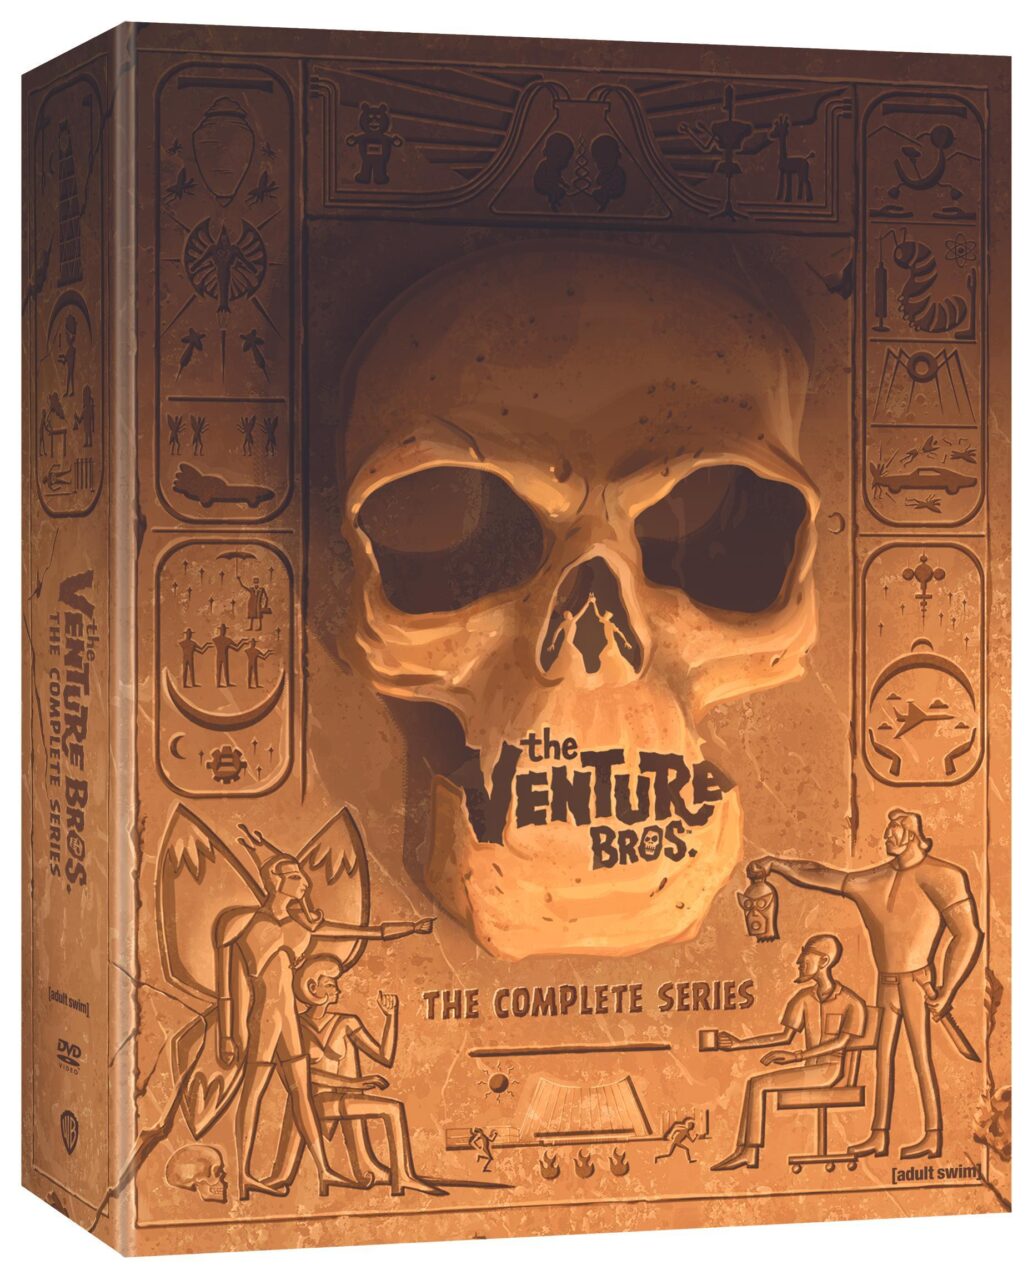 The Venture Bros.: The Complete Series cover (Warner Bros. Home Entertainment)